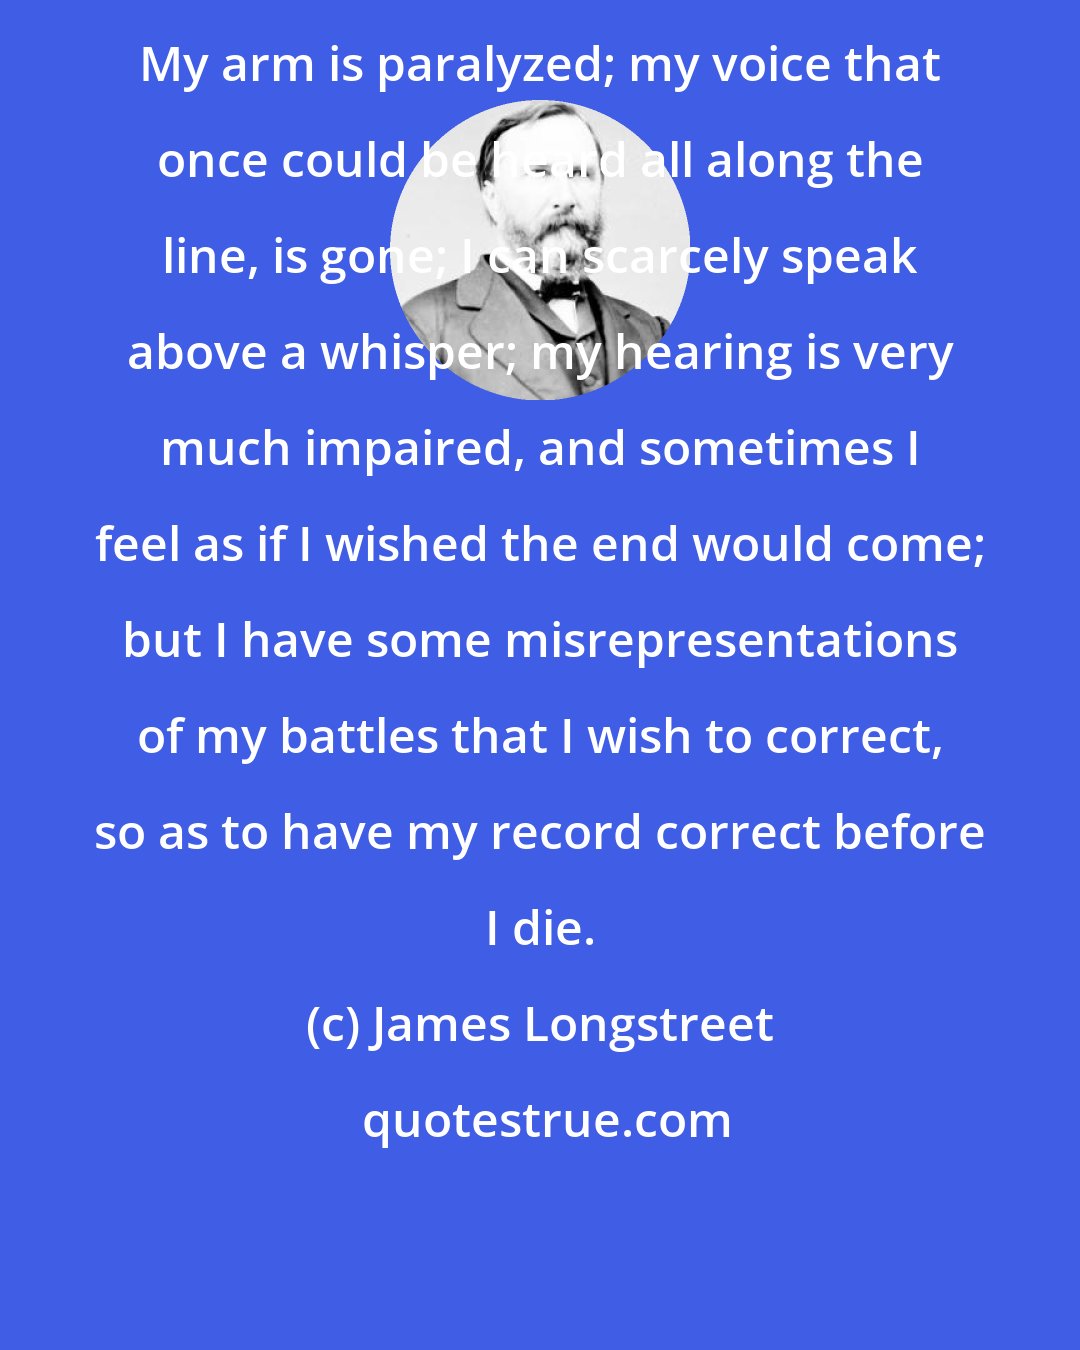 James Longstreet: My arm is paralyzed; my voice that once could be heard all along the line, is gone; I can scarcely speak above a whisper; my hearing is very much impaired, and sometimes I feel as if I wished the end would come; but I have some misrepresentations of my battles that I wish to correct, so as to have my record correct before I die.